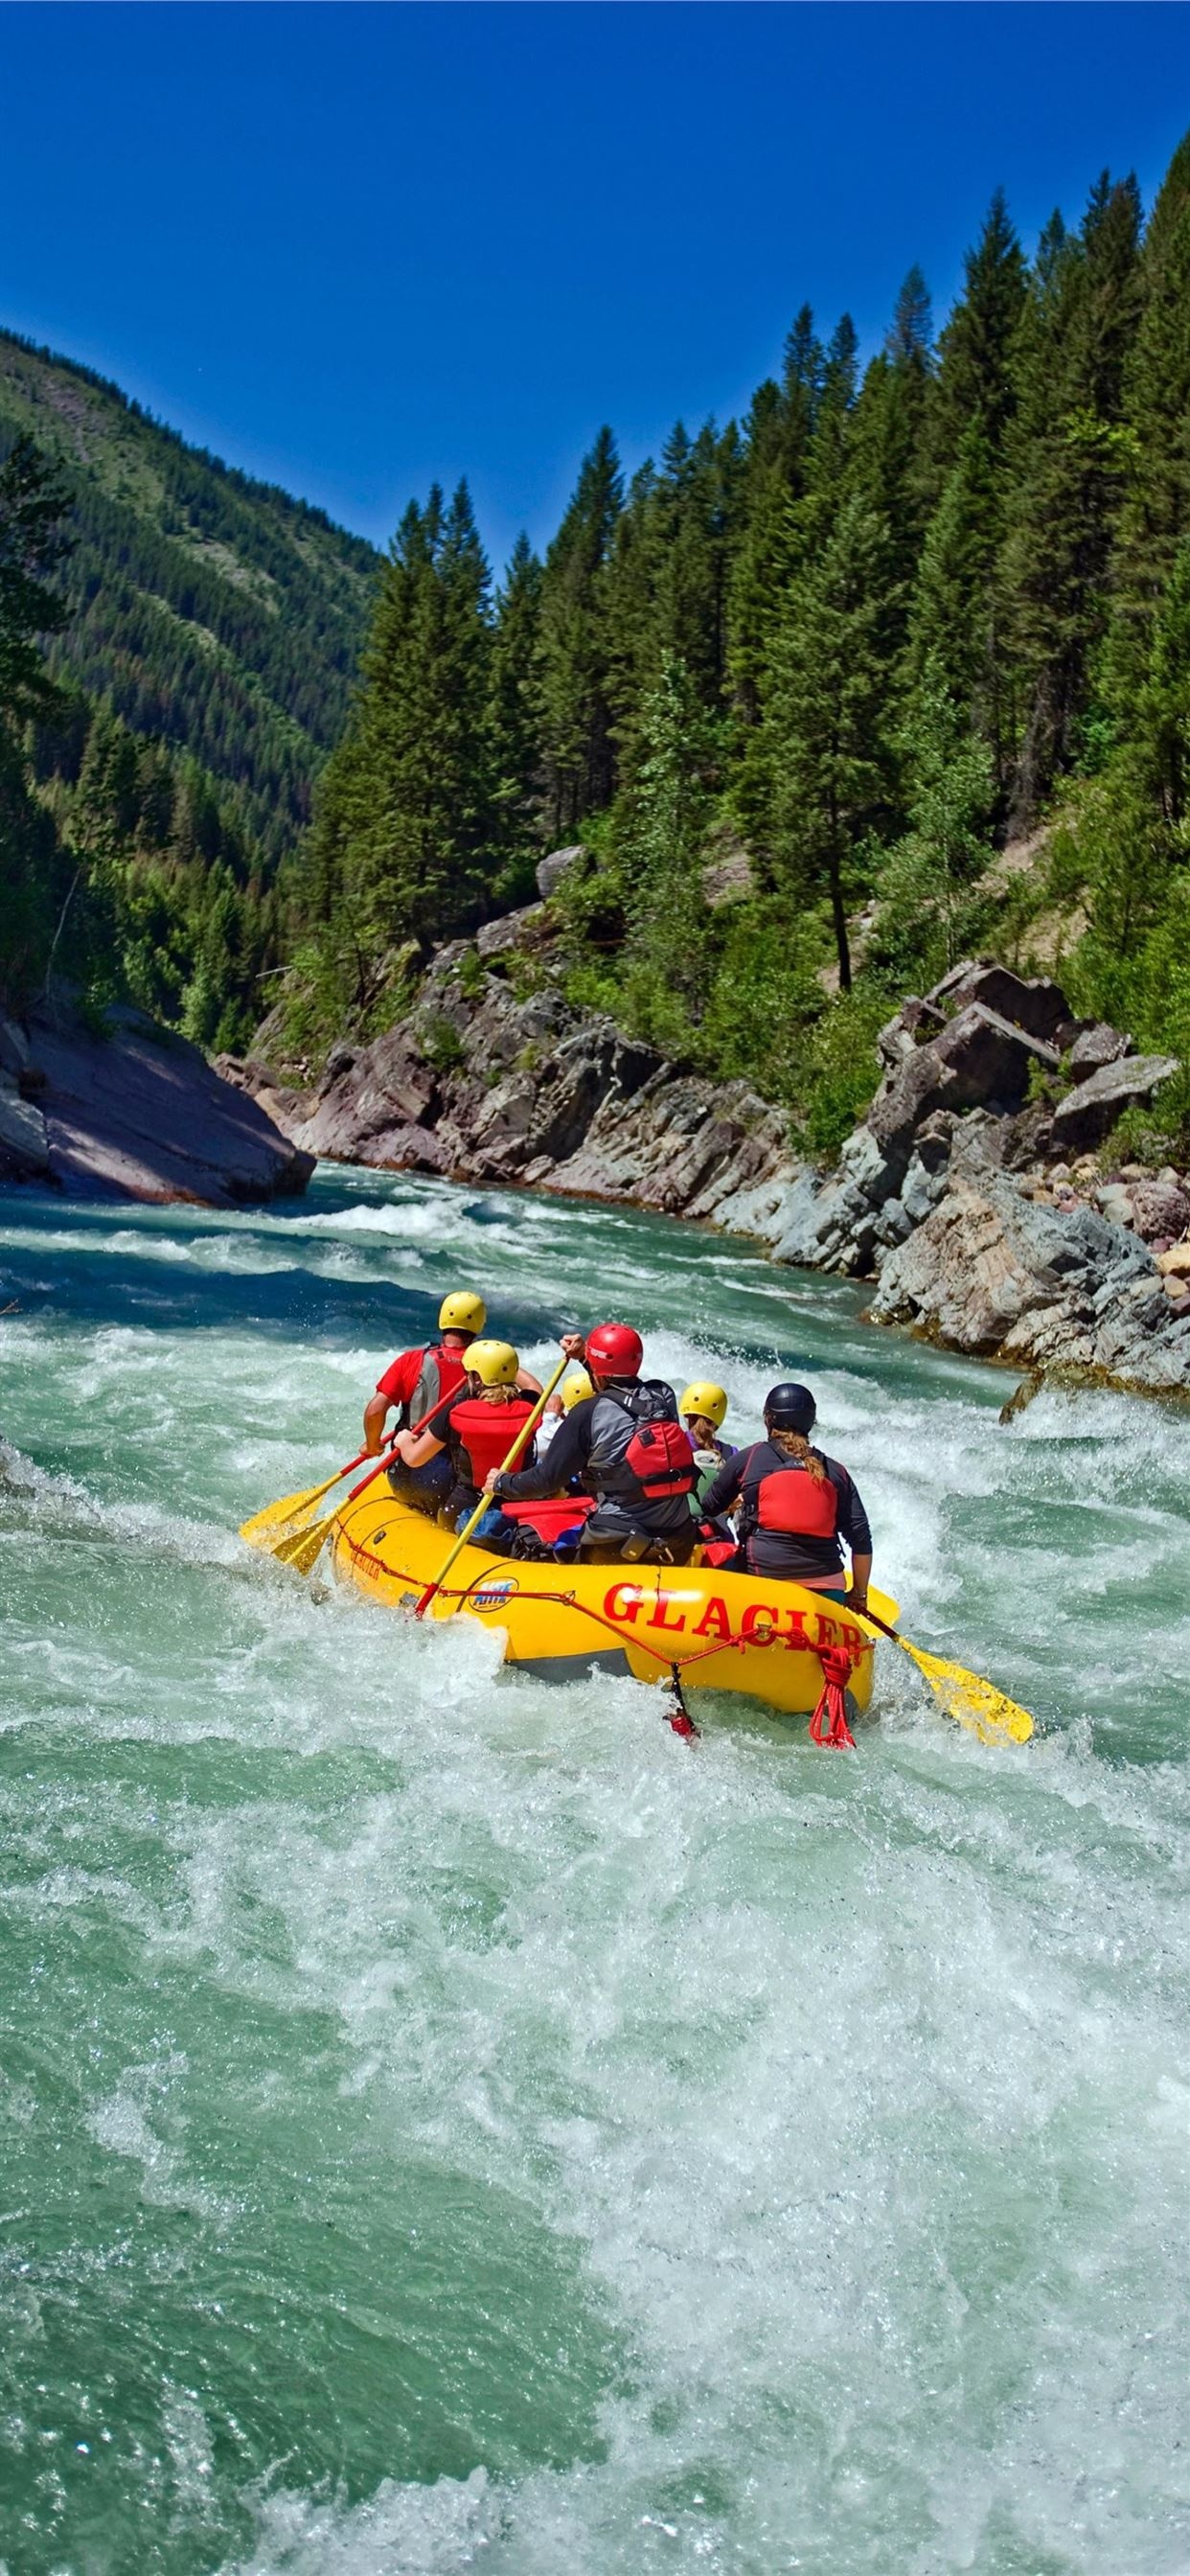 Rafting: Adventurous boating down an intense river in the mountains. 1250x2690 HD Wallpaper.